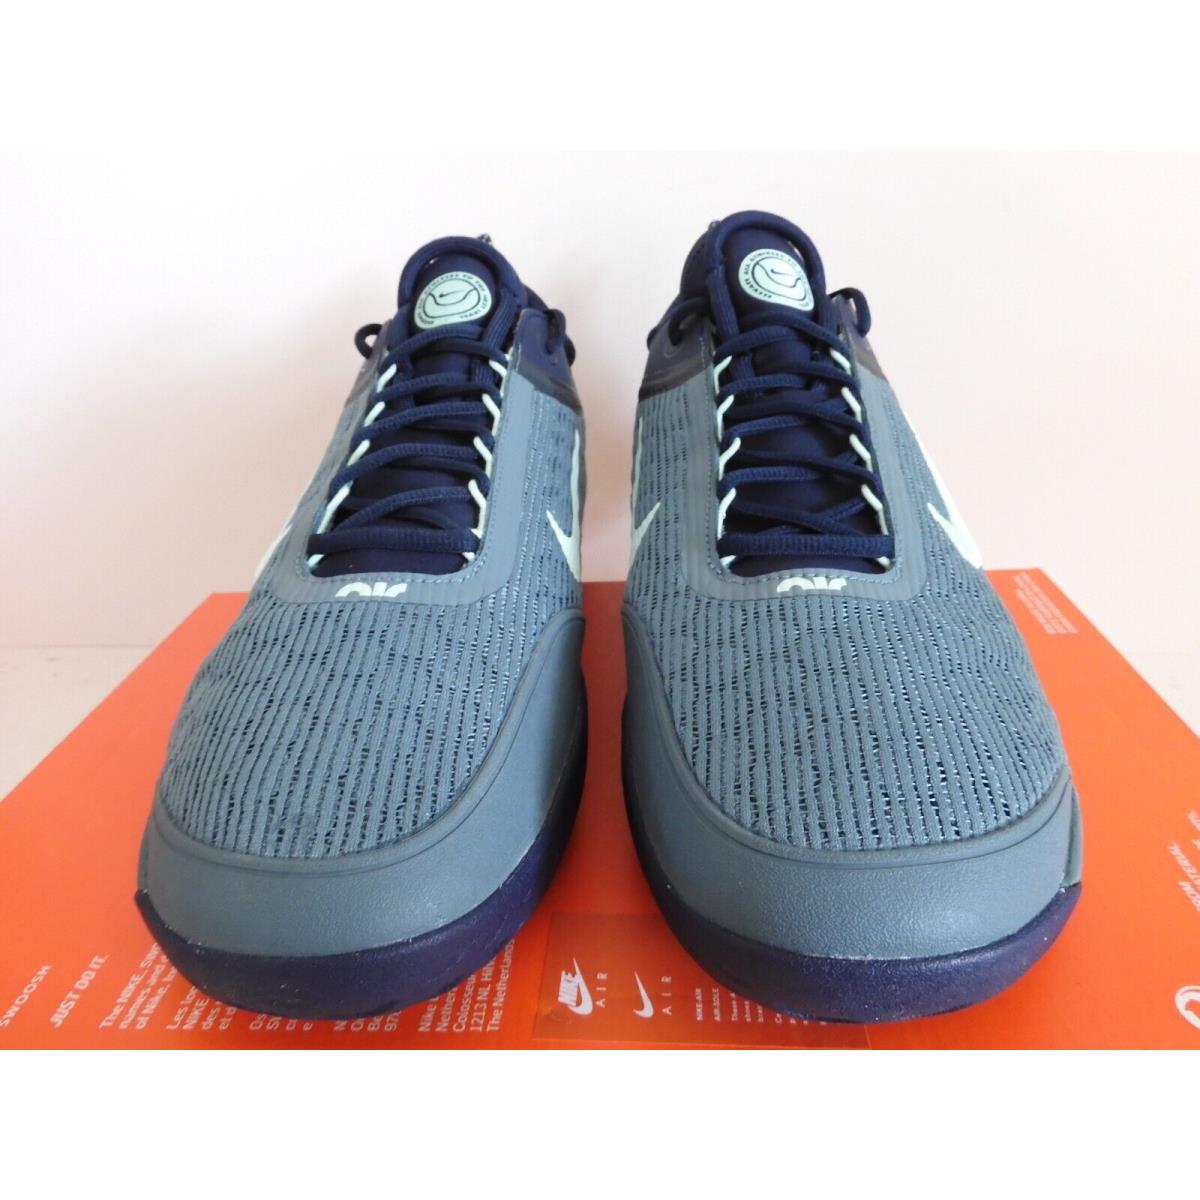 Nike shoes Zoom Court - Blue 1